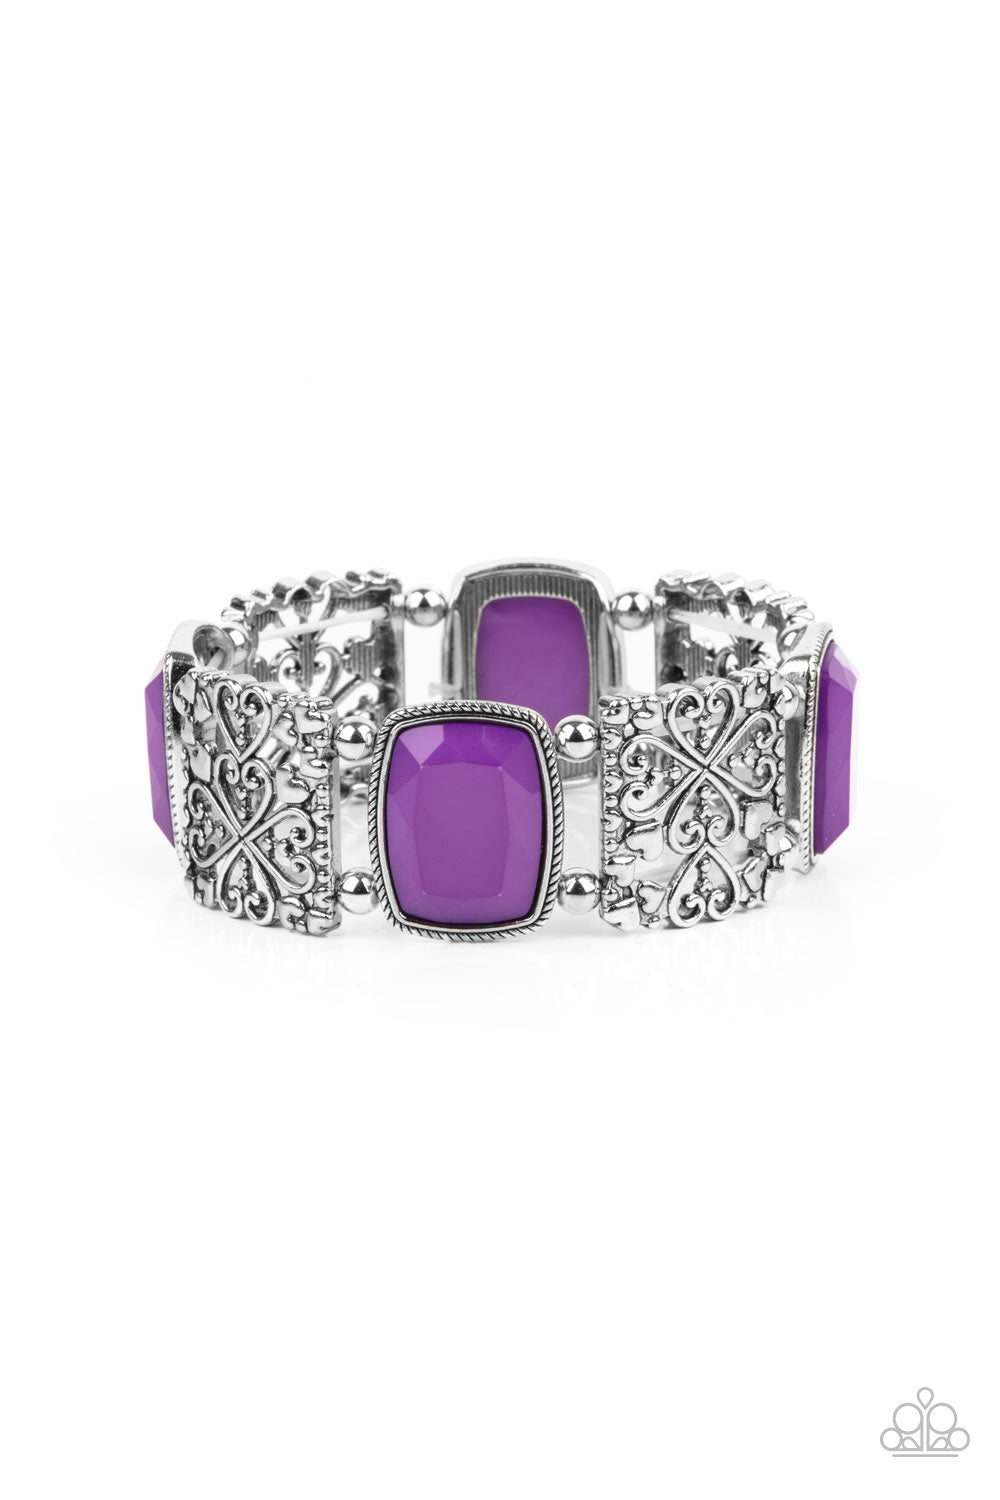 Colorful Coronation Purple Bracelet - Paparazzi Accessories  Infused with dainty silver heart accents, whimsically filled silver filigree frames and faceted Amethyst Orchid beads are threaded along stretchy bands around the wrist for a colorful flair.  All Paparazzi Accessories are lead free and nickel free!  Sold as one individual bracelet.